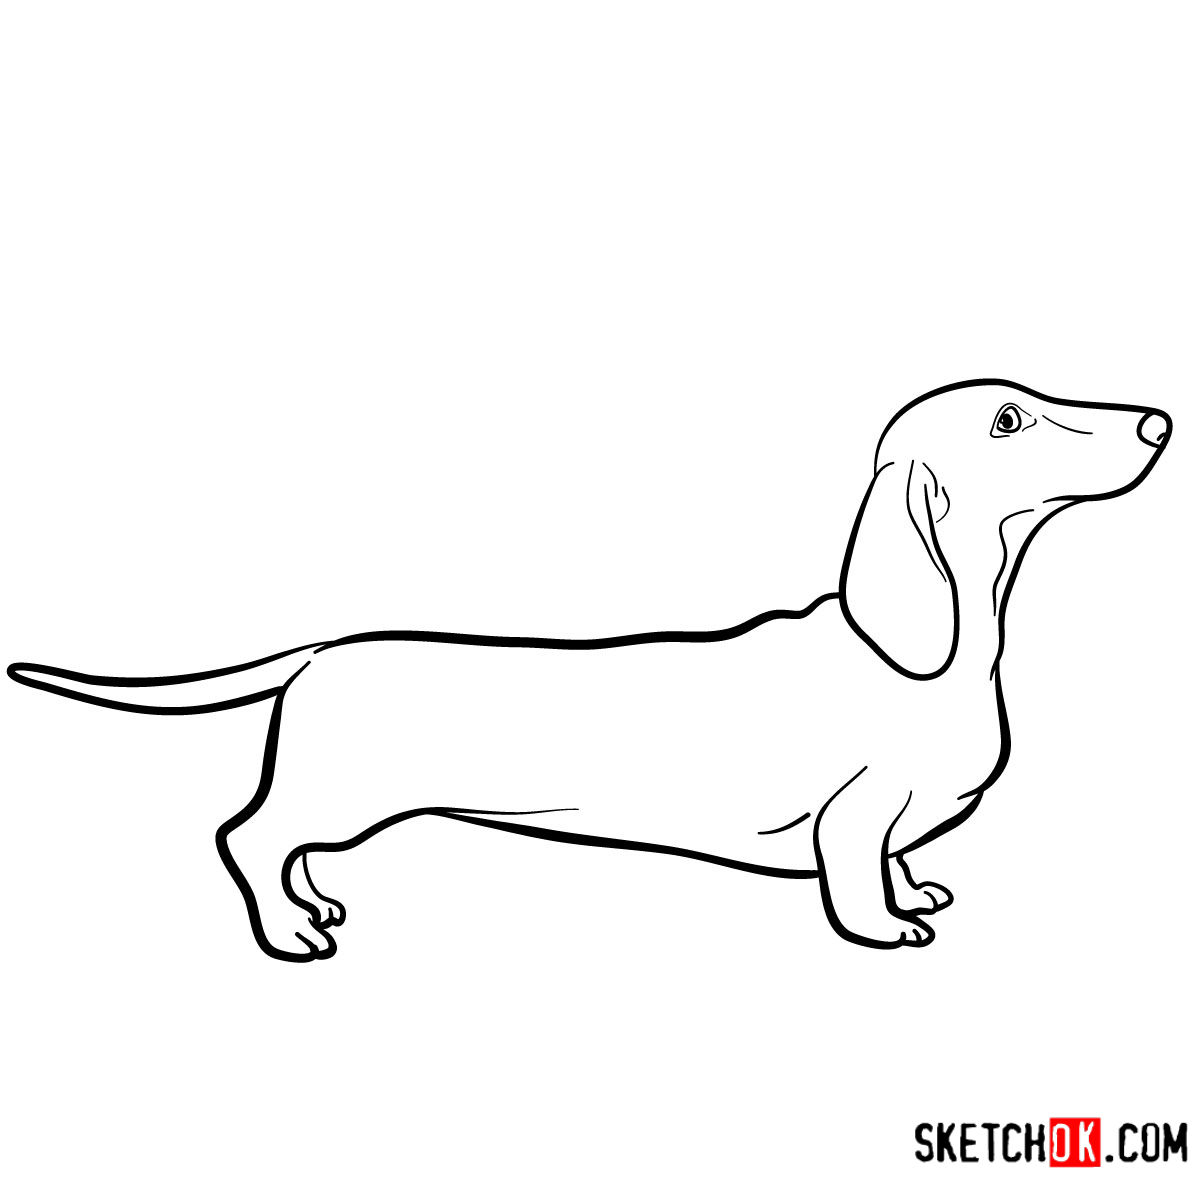 How to draw the Dachshund dog